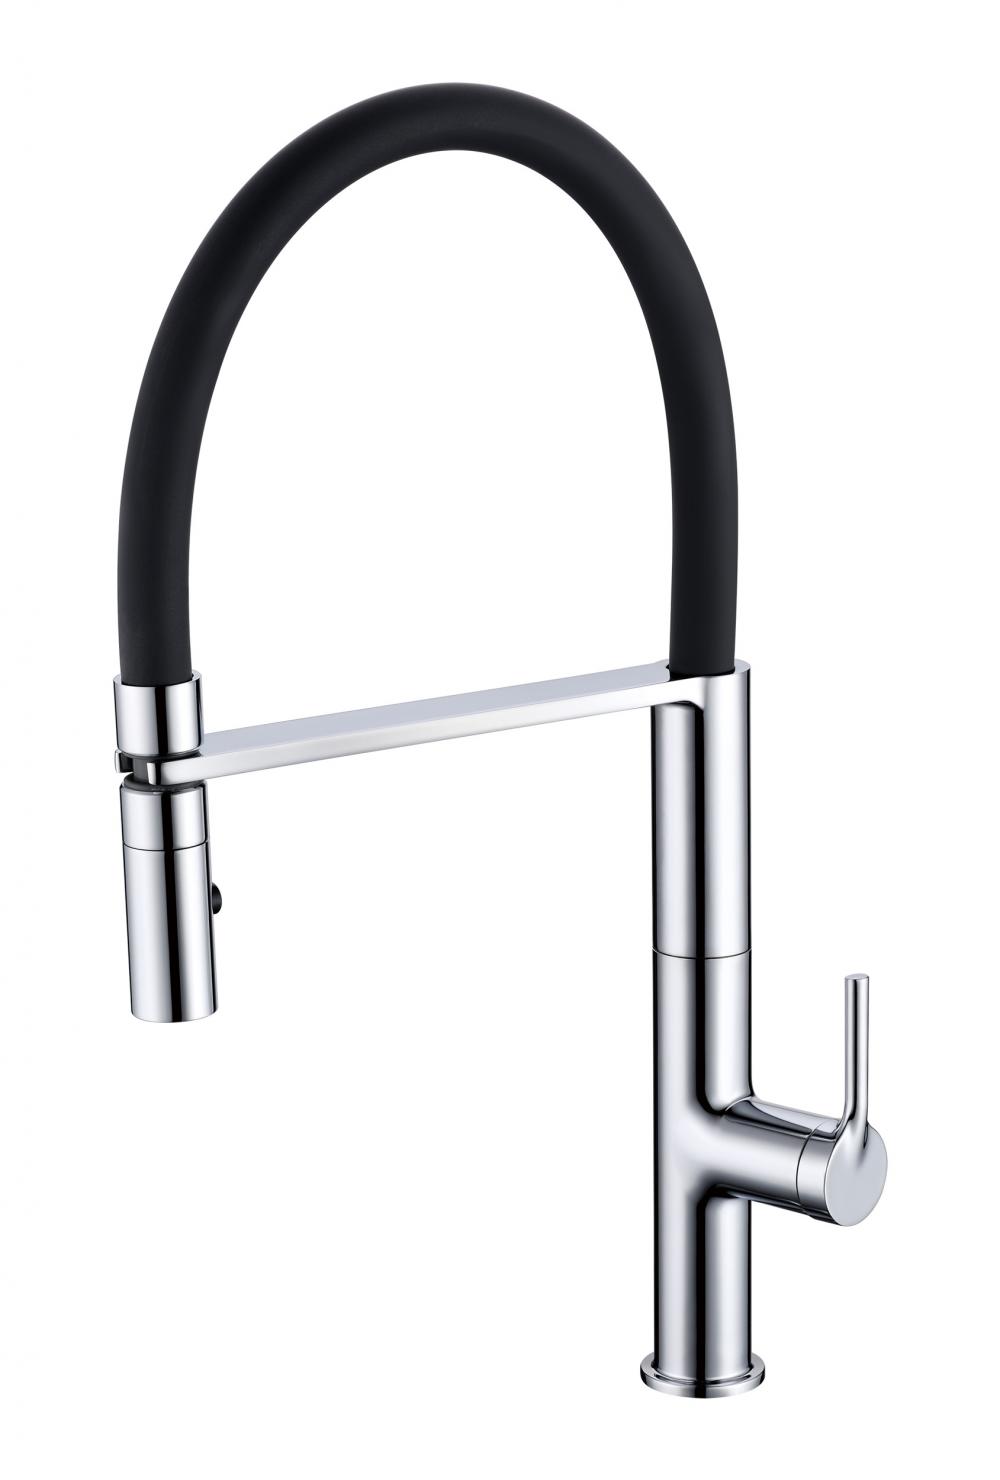 KITCHEN SINK FAUCETS